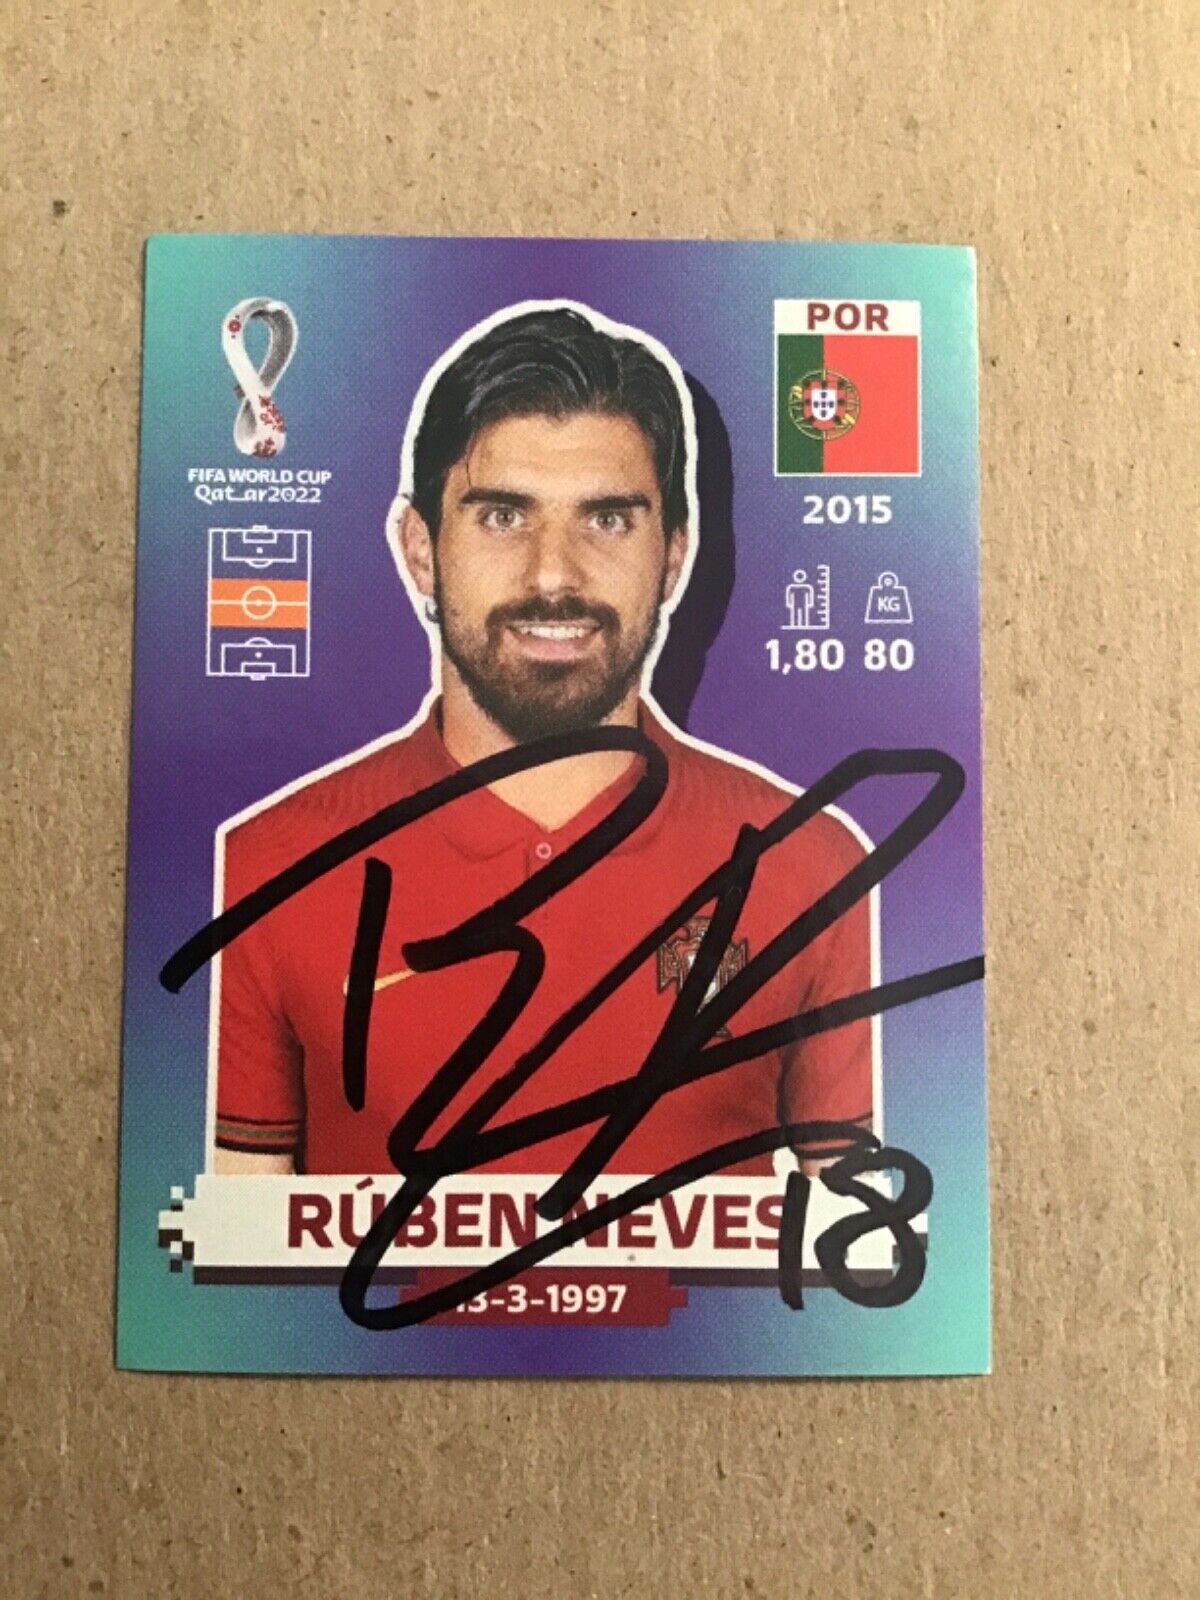 Ruben Neves, Portugal 🇵🇹 Panini FIFA World Cup 2022 hand signed